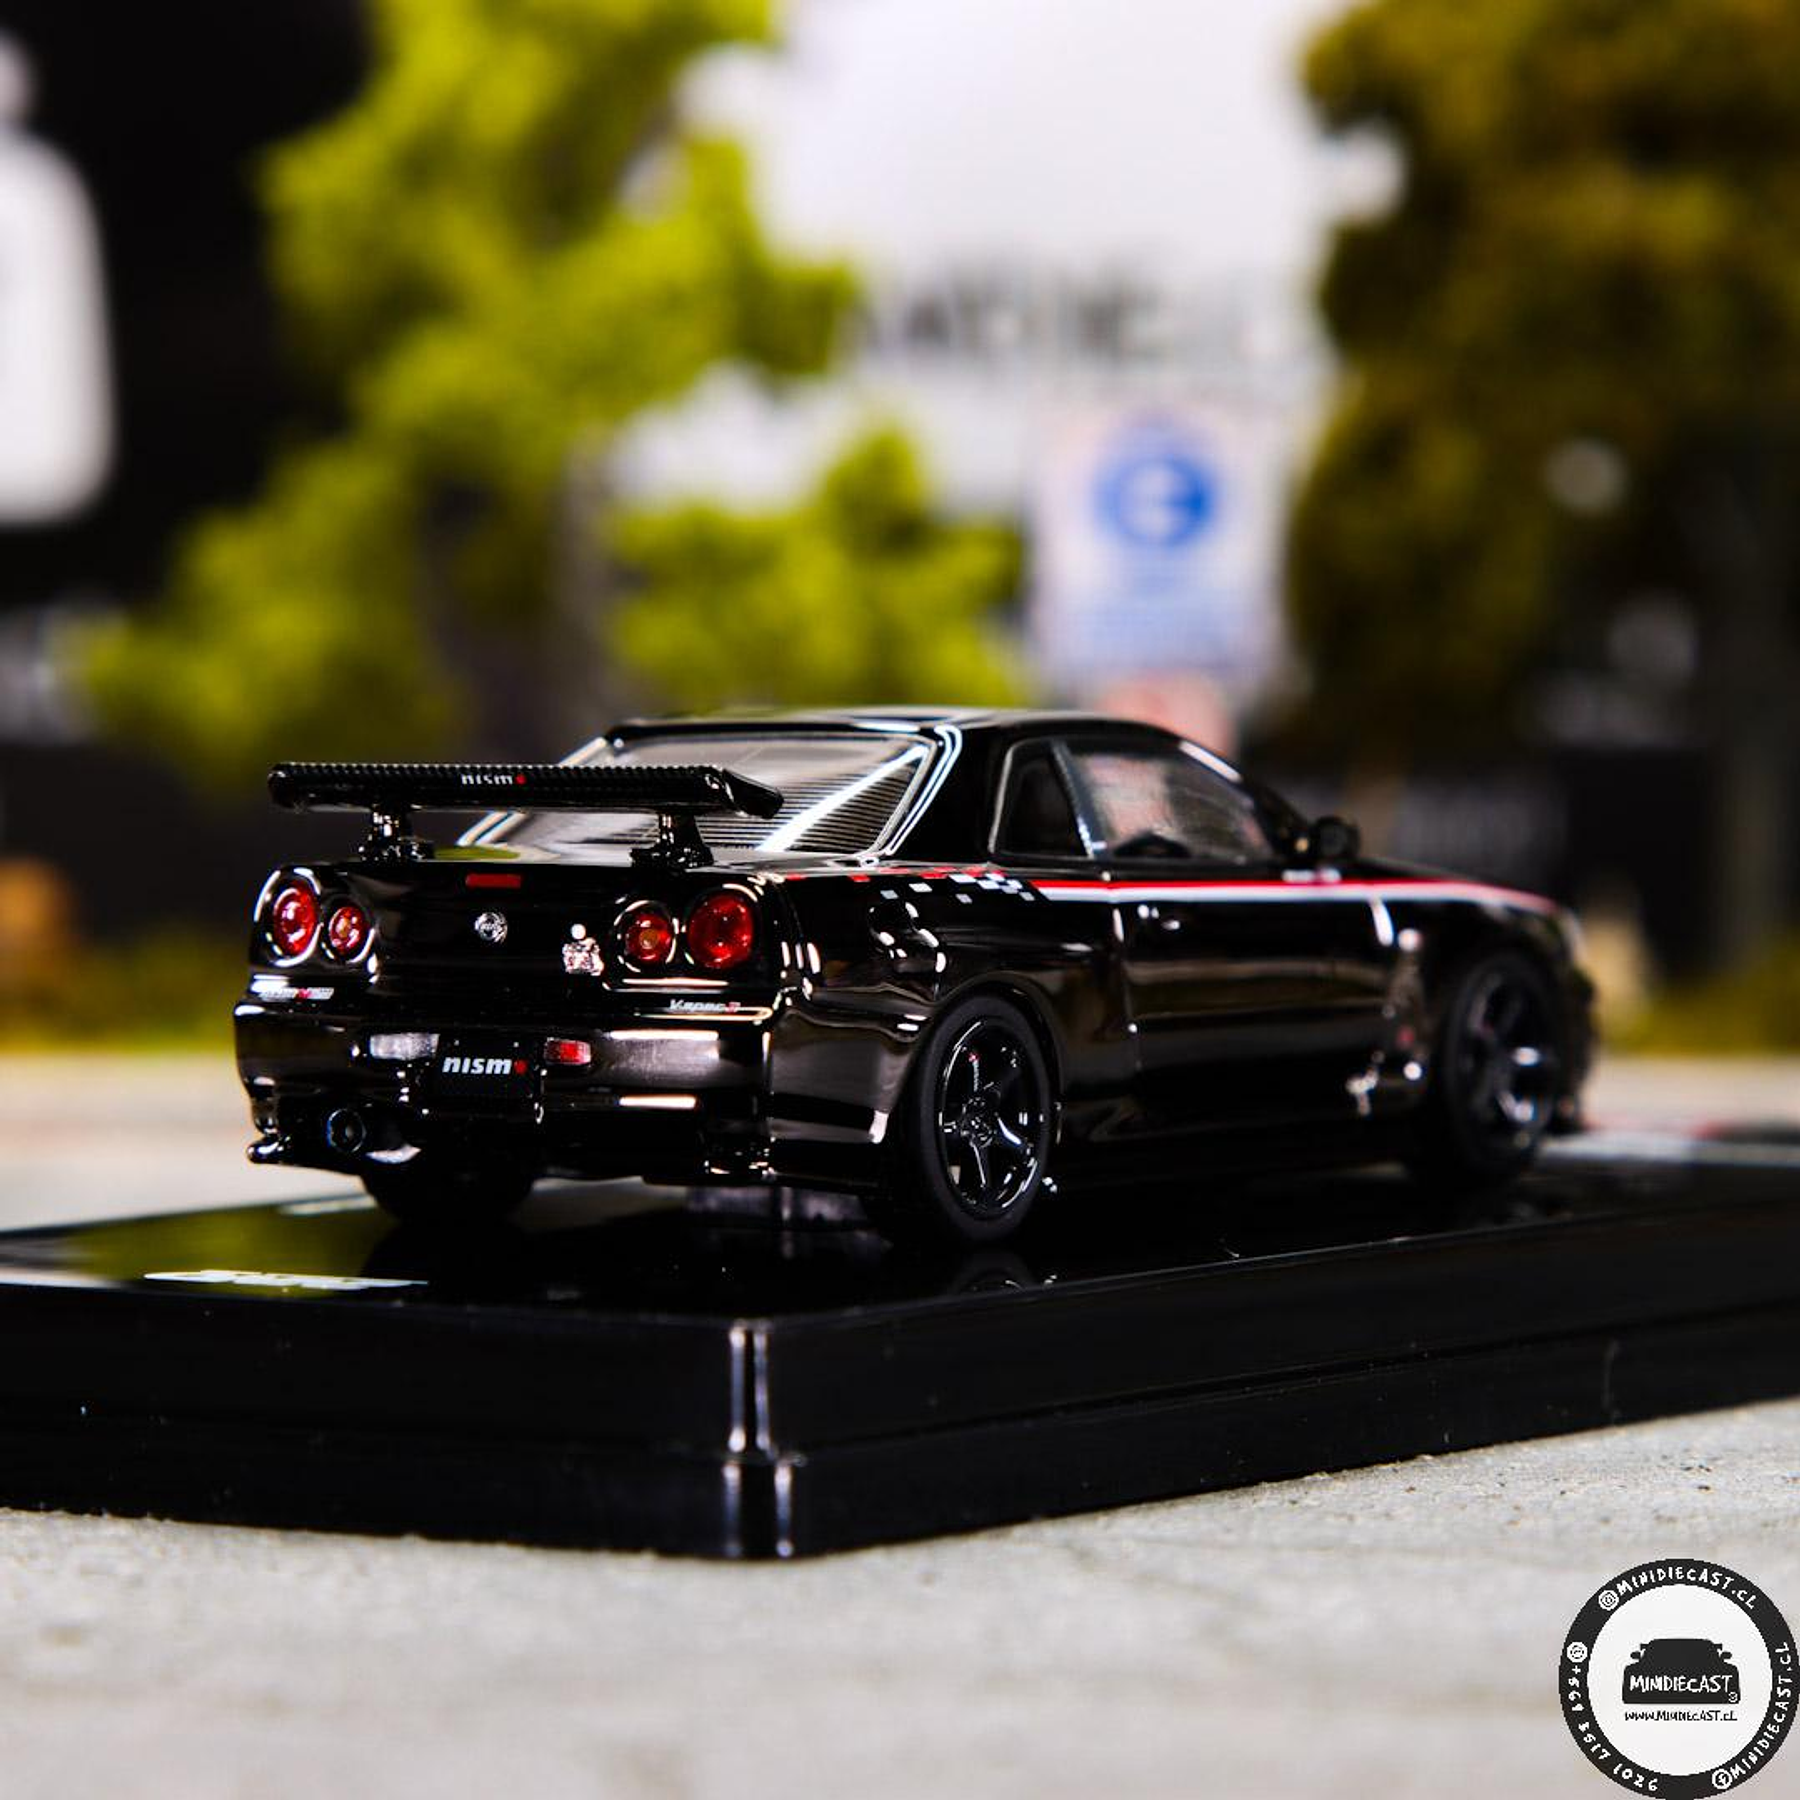 Pack 3 INNO 1:64 Nissan Skyline  GT-R R34 NISMO R-Tune Chrome Hobby Expo China 2023 Event Edition. GOLD. BLACK & SILVER